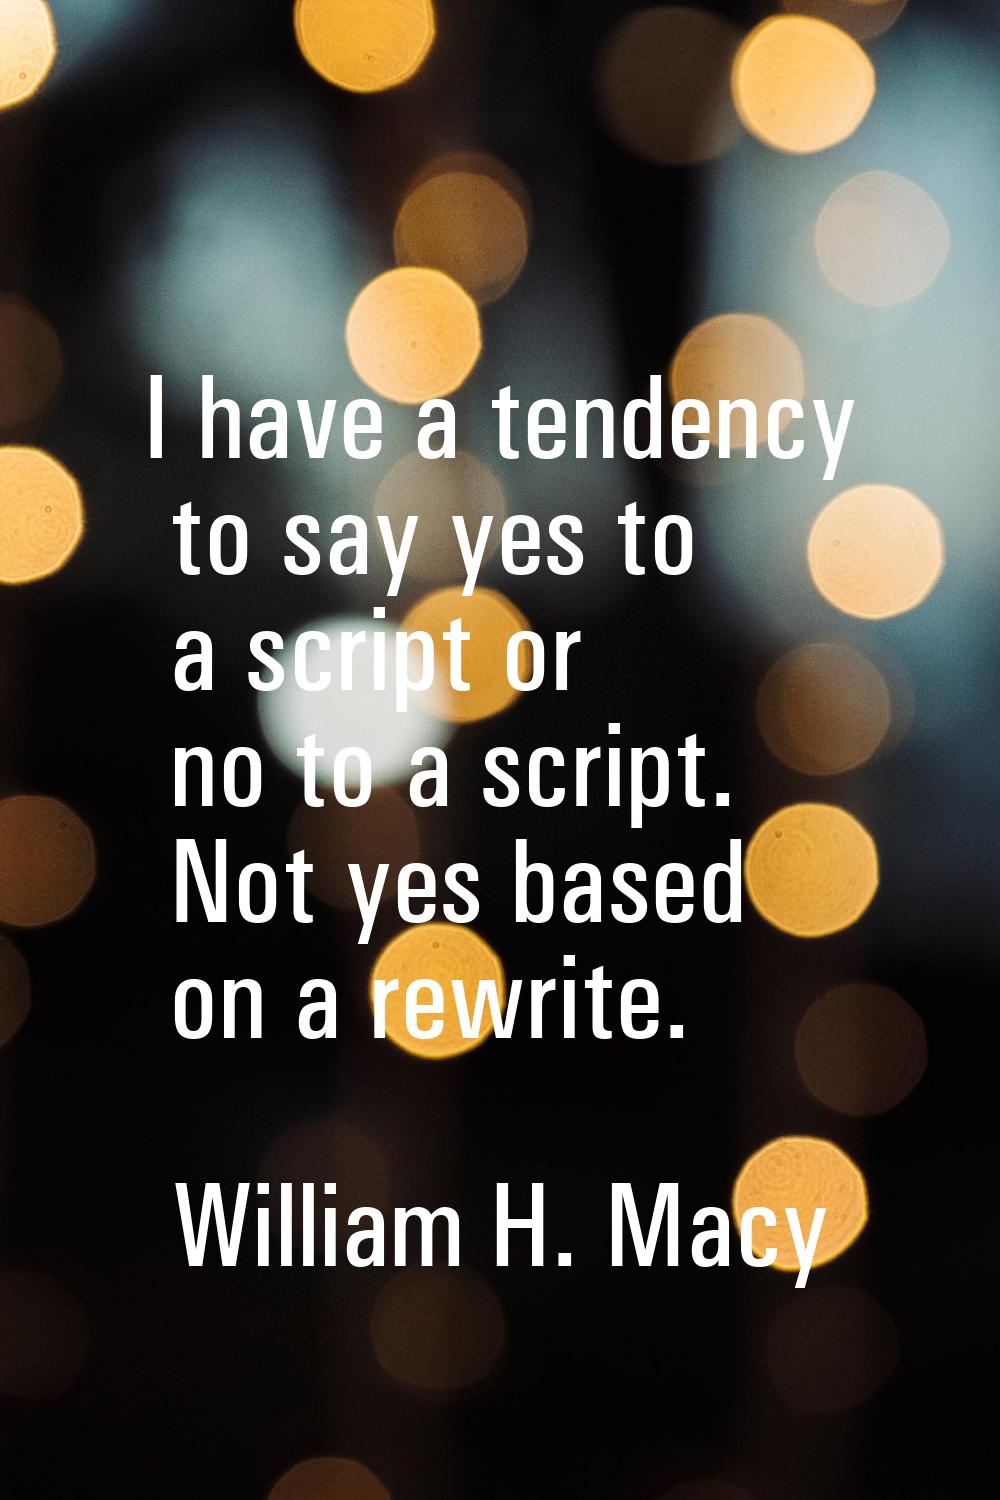 I have a tendency to say yes to a script or no to a script. Not yes based on a rewrite.